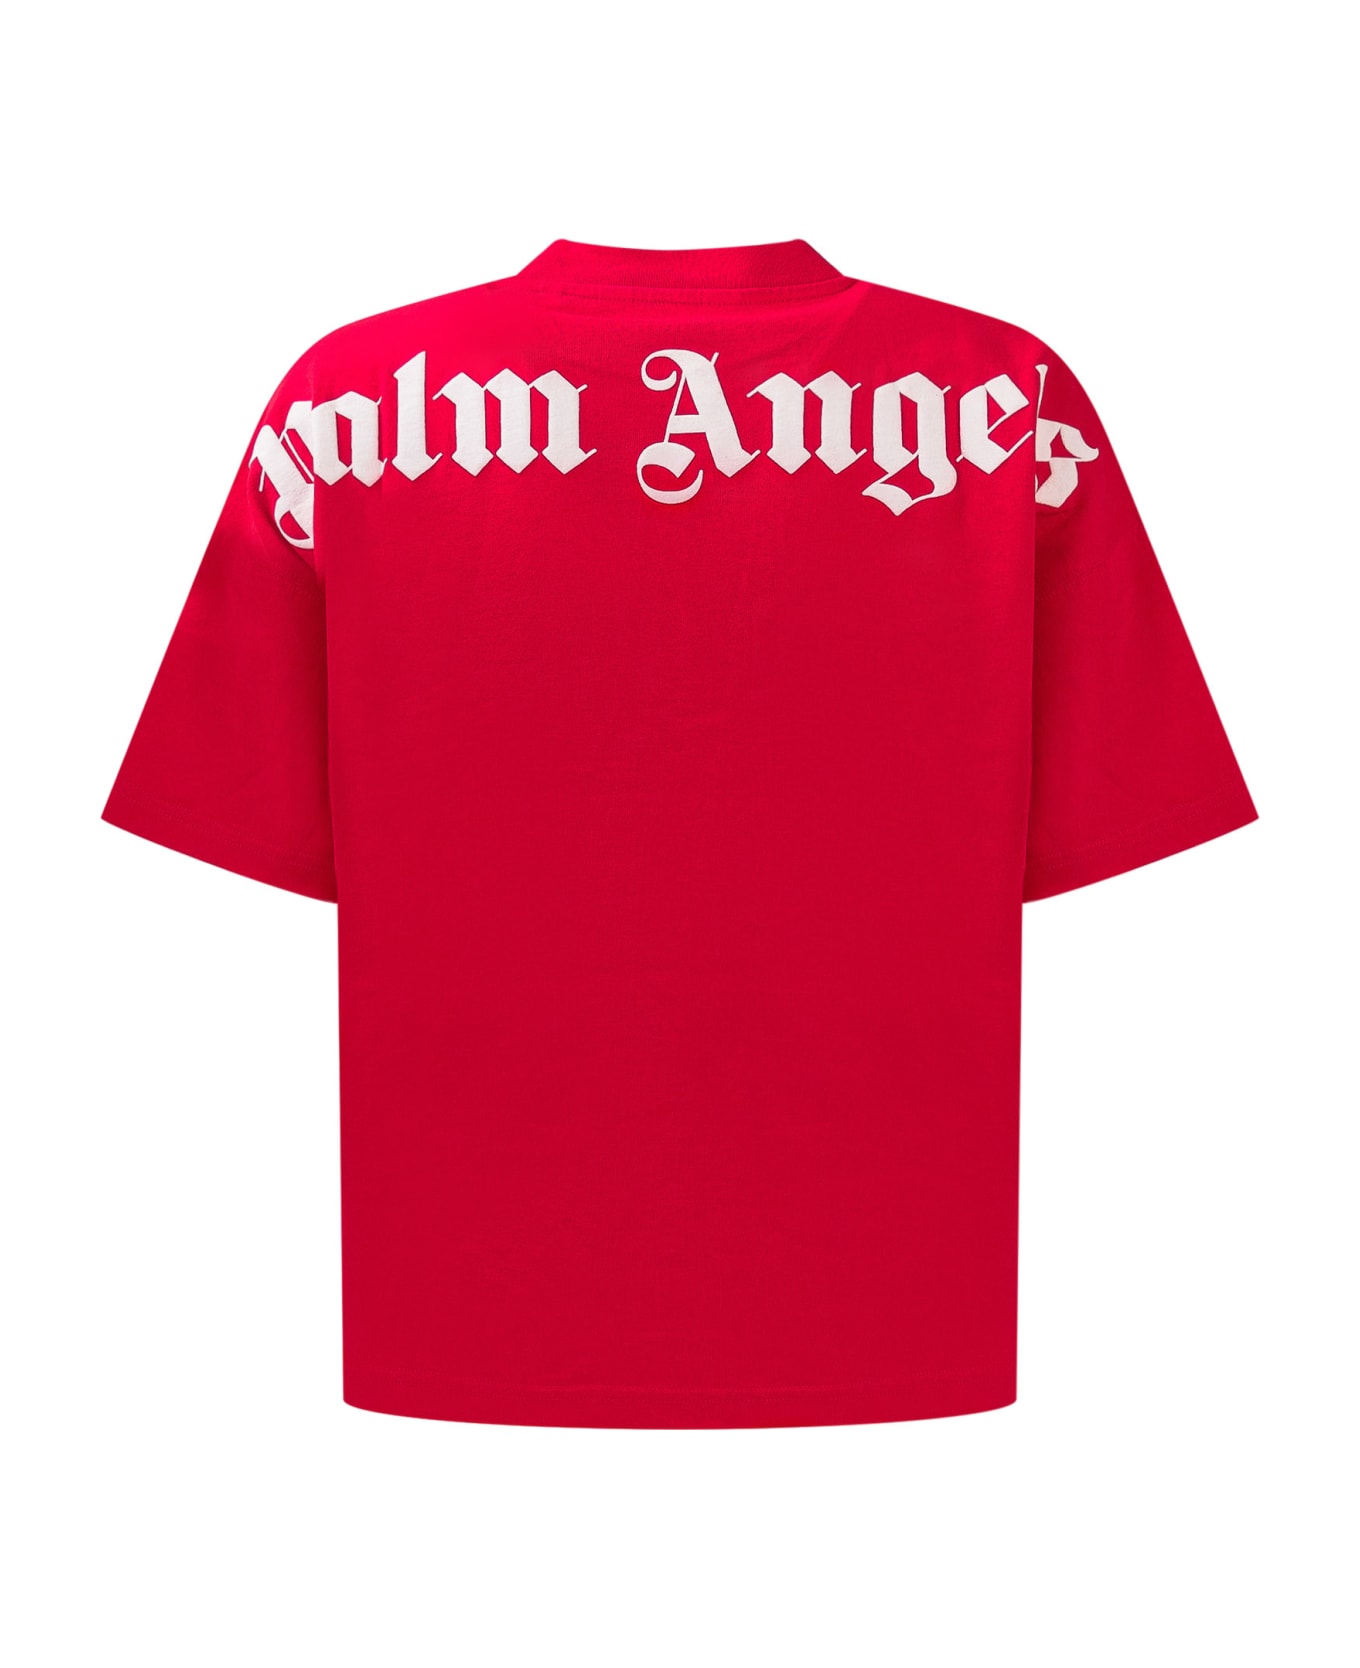 Palm Angels Logo T-shirt - RED WHITE